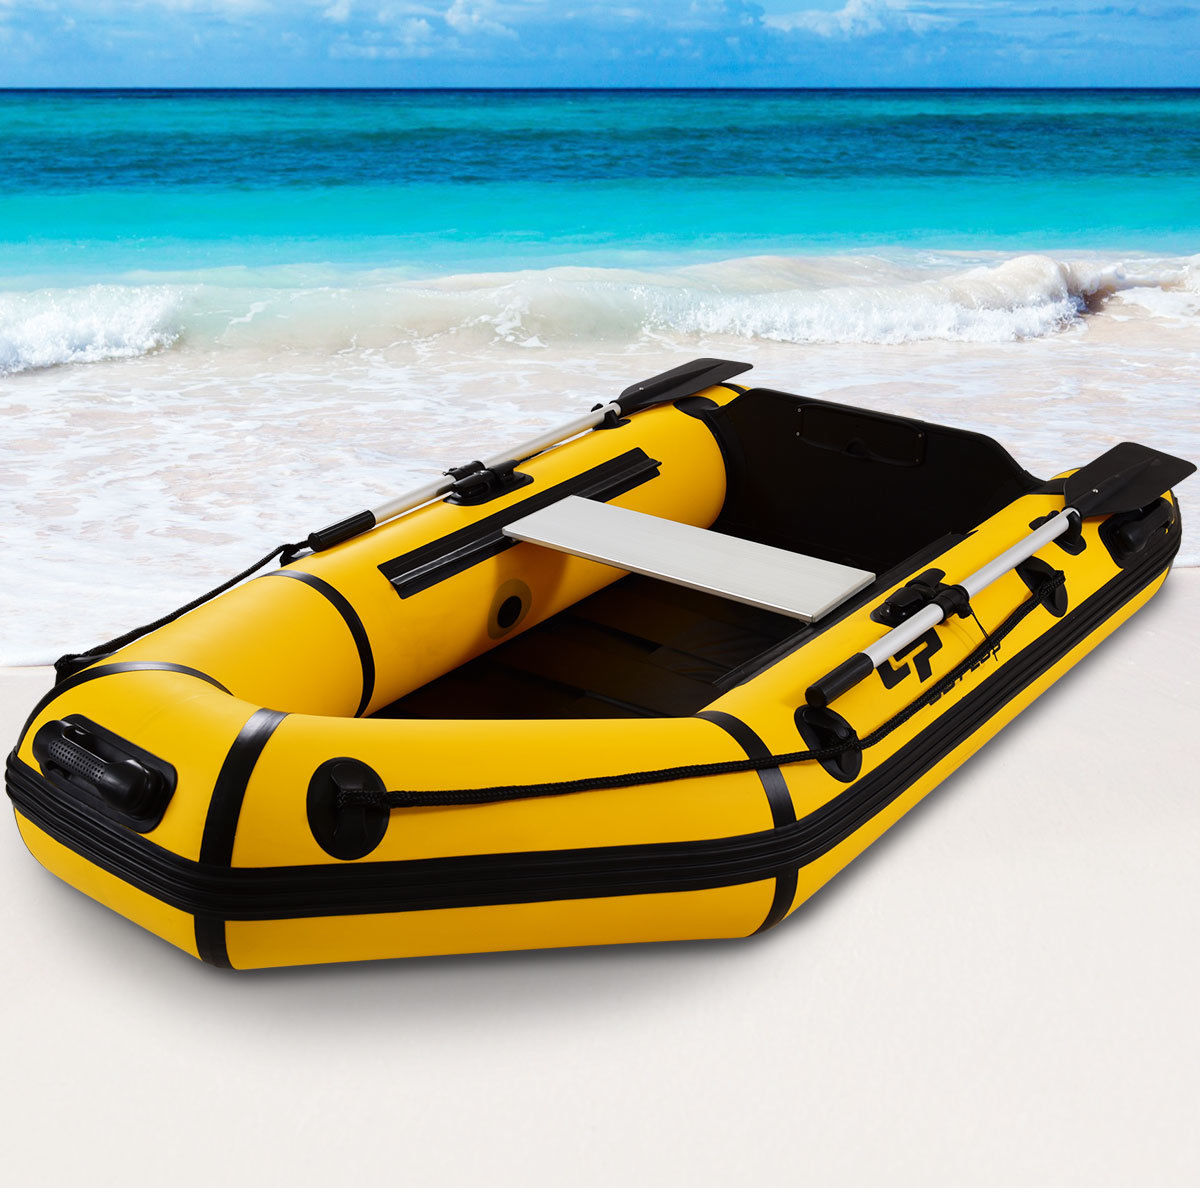 Goplus 2 Person 7.5FT Inflatable Dinghy Boat Fishing Tender Rafting Water